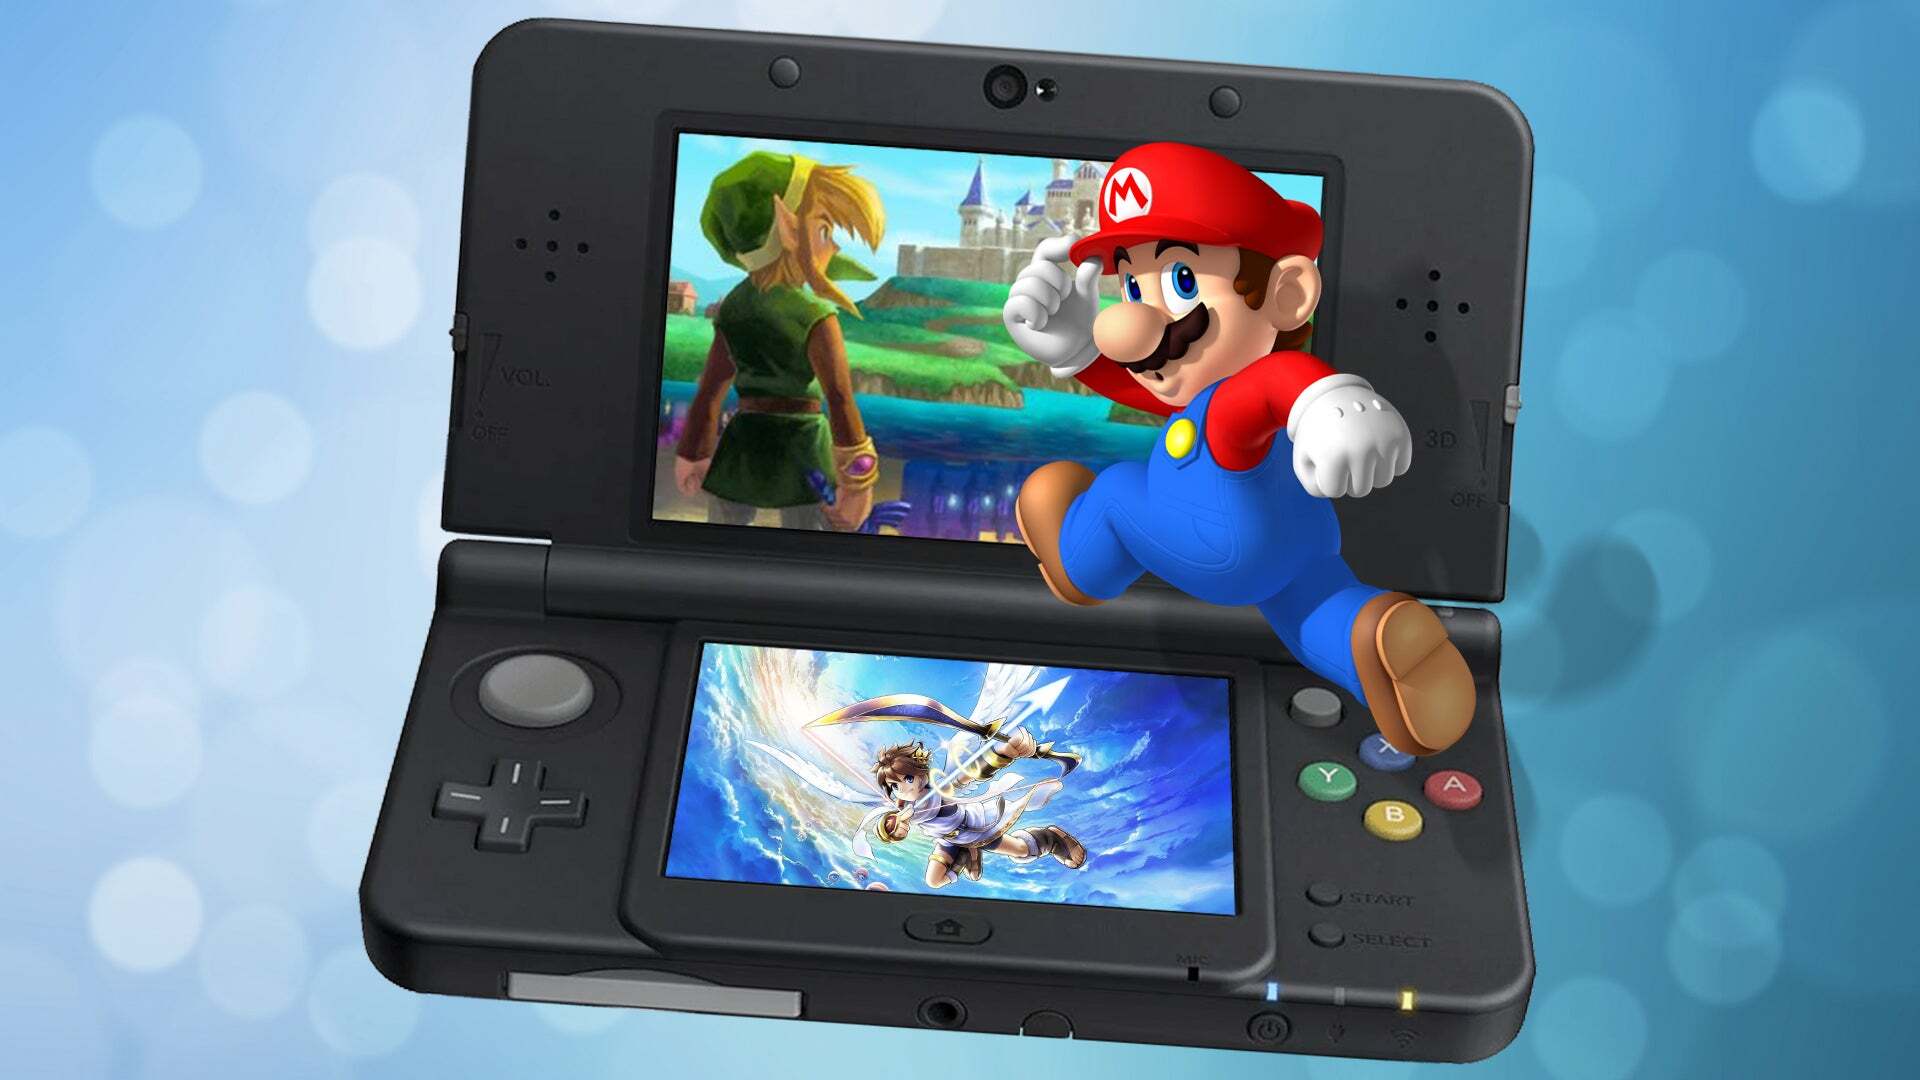 Nintendo 3DS. How to Choose Nintendo 3DS Roms for…, by Romsie